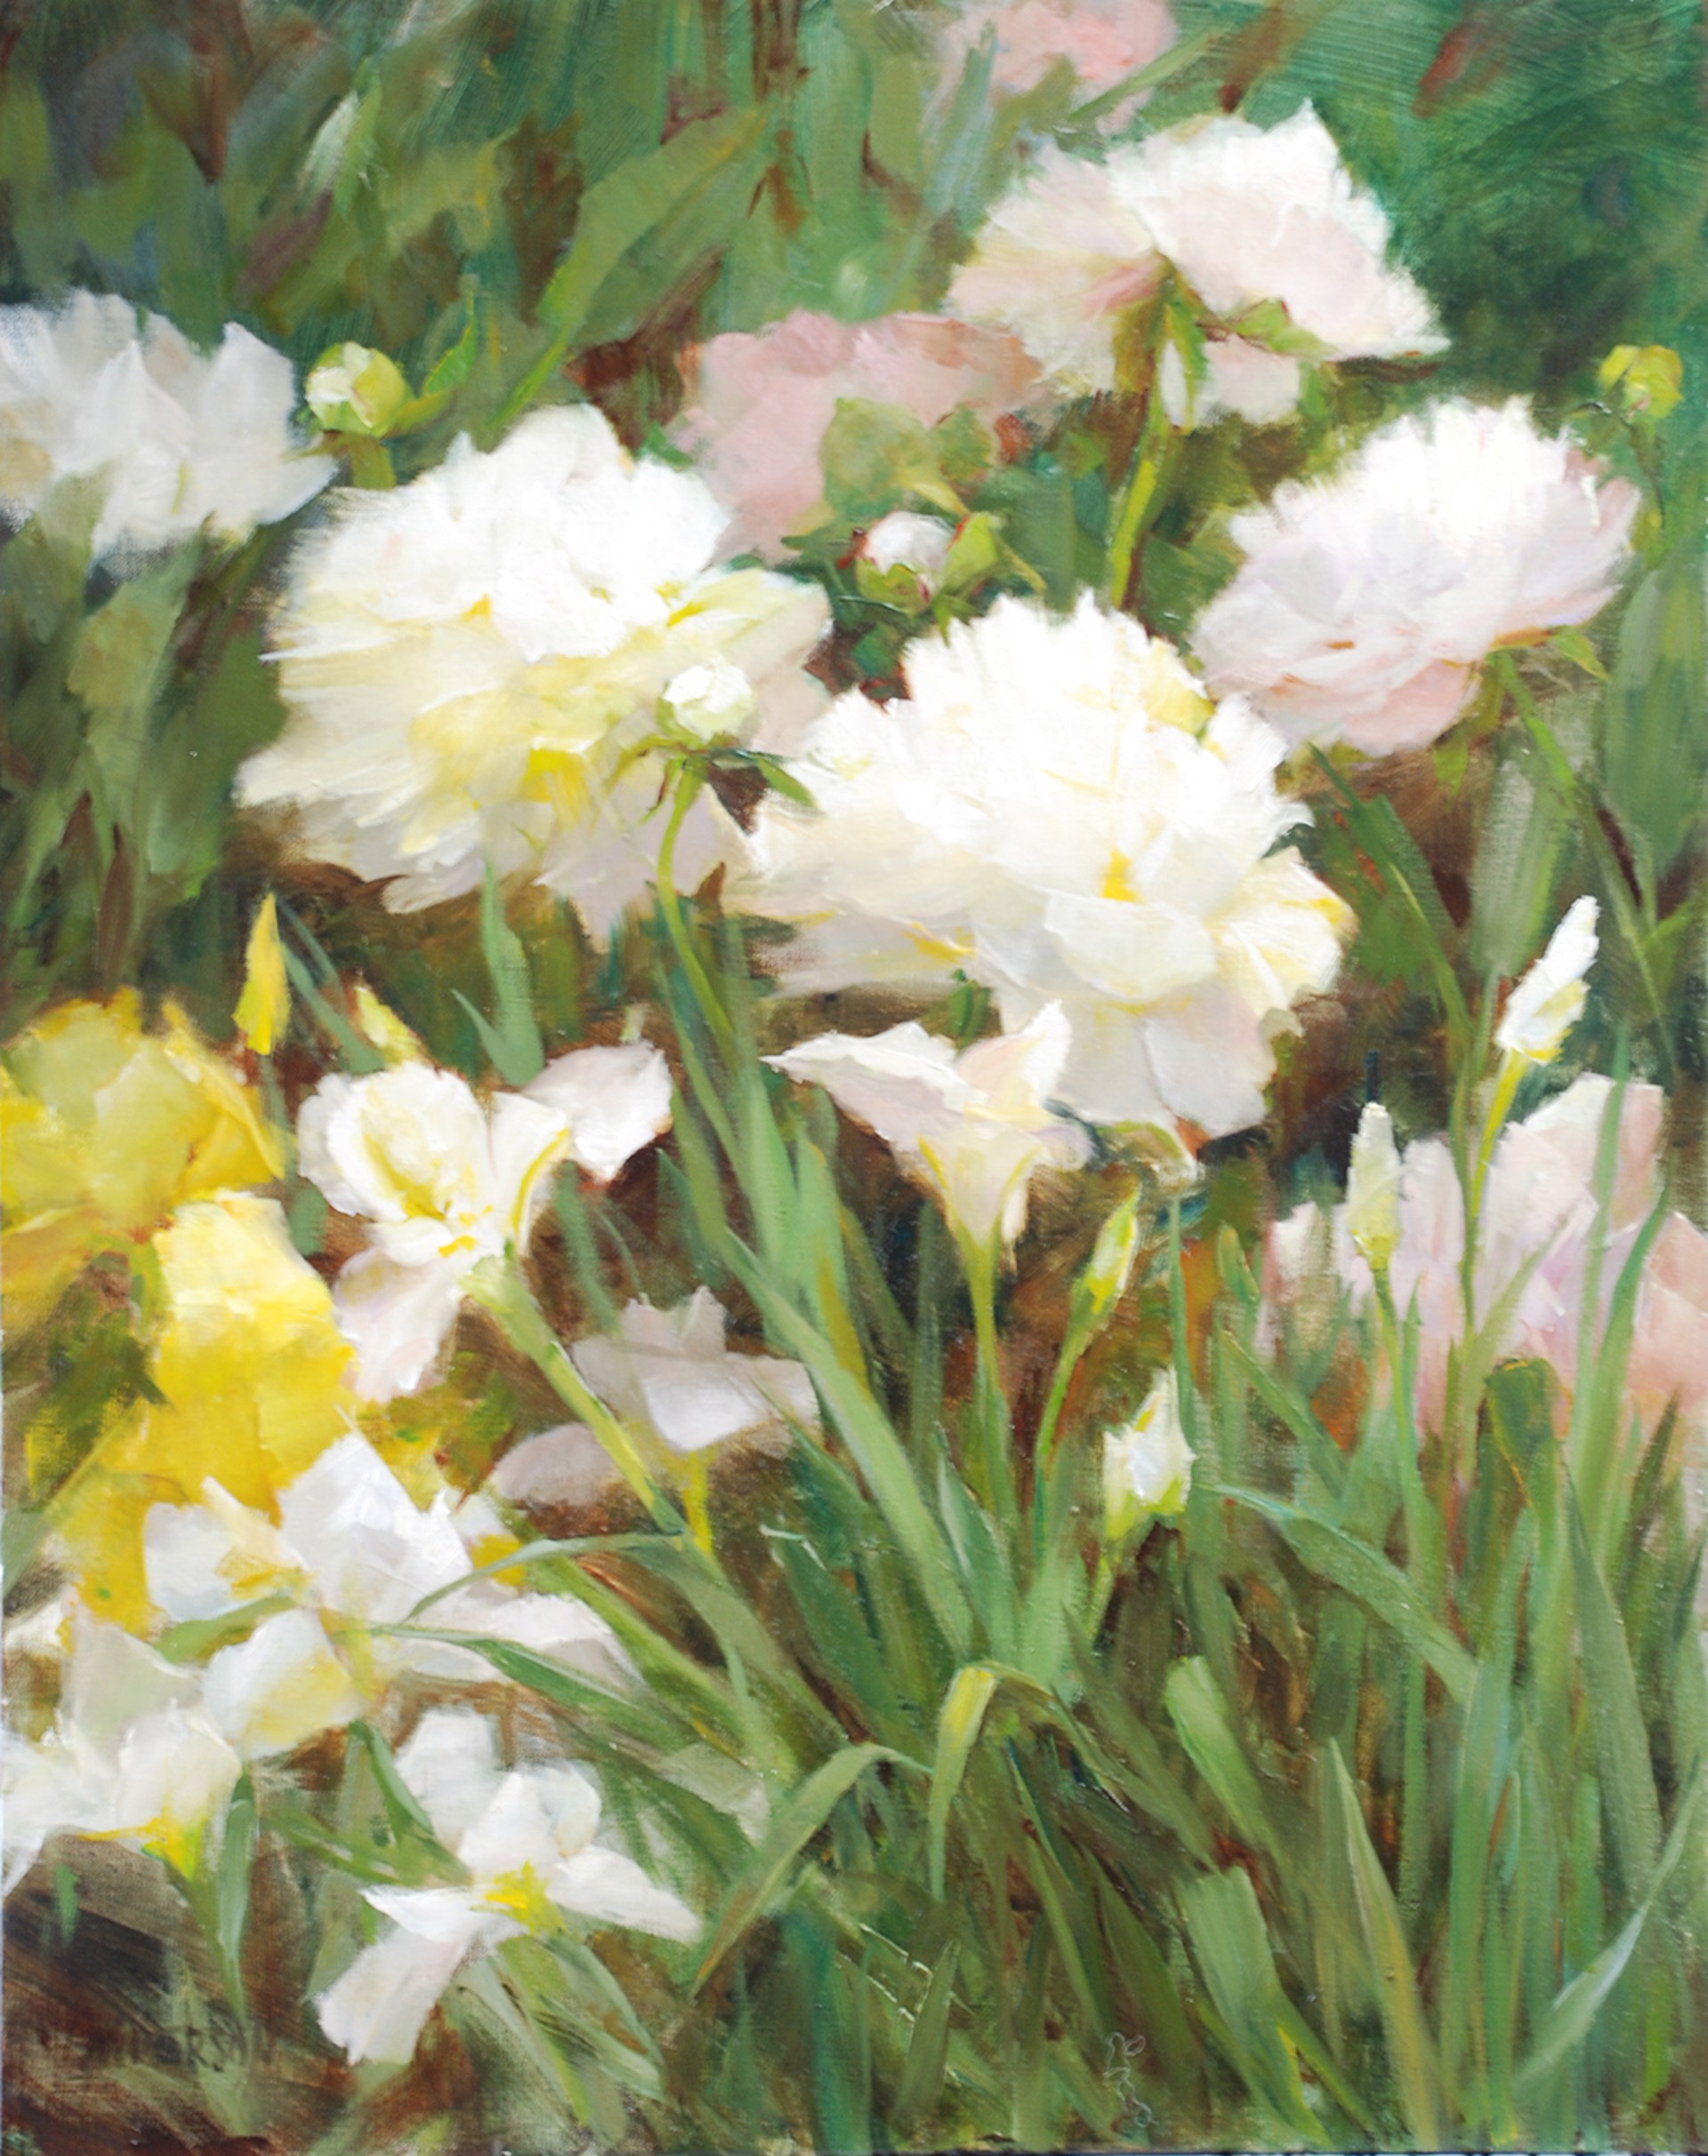 Peonies and Iris by Kathy Anderson